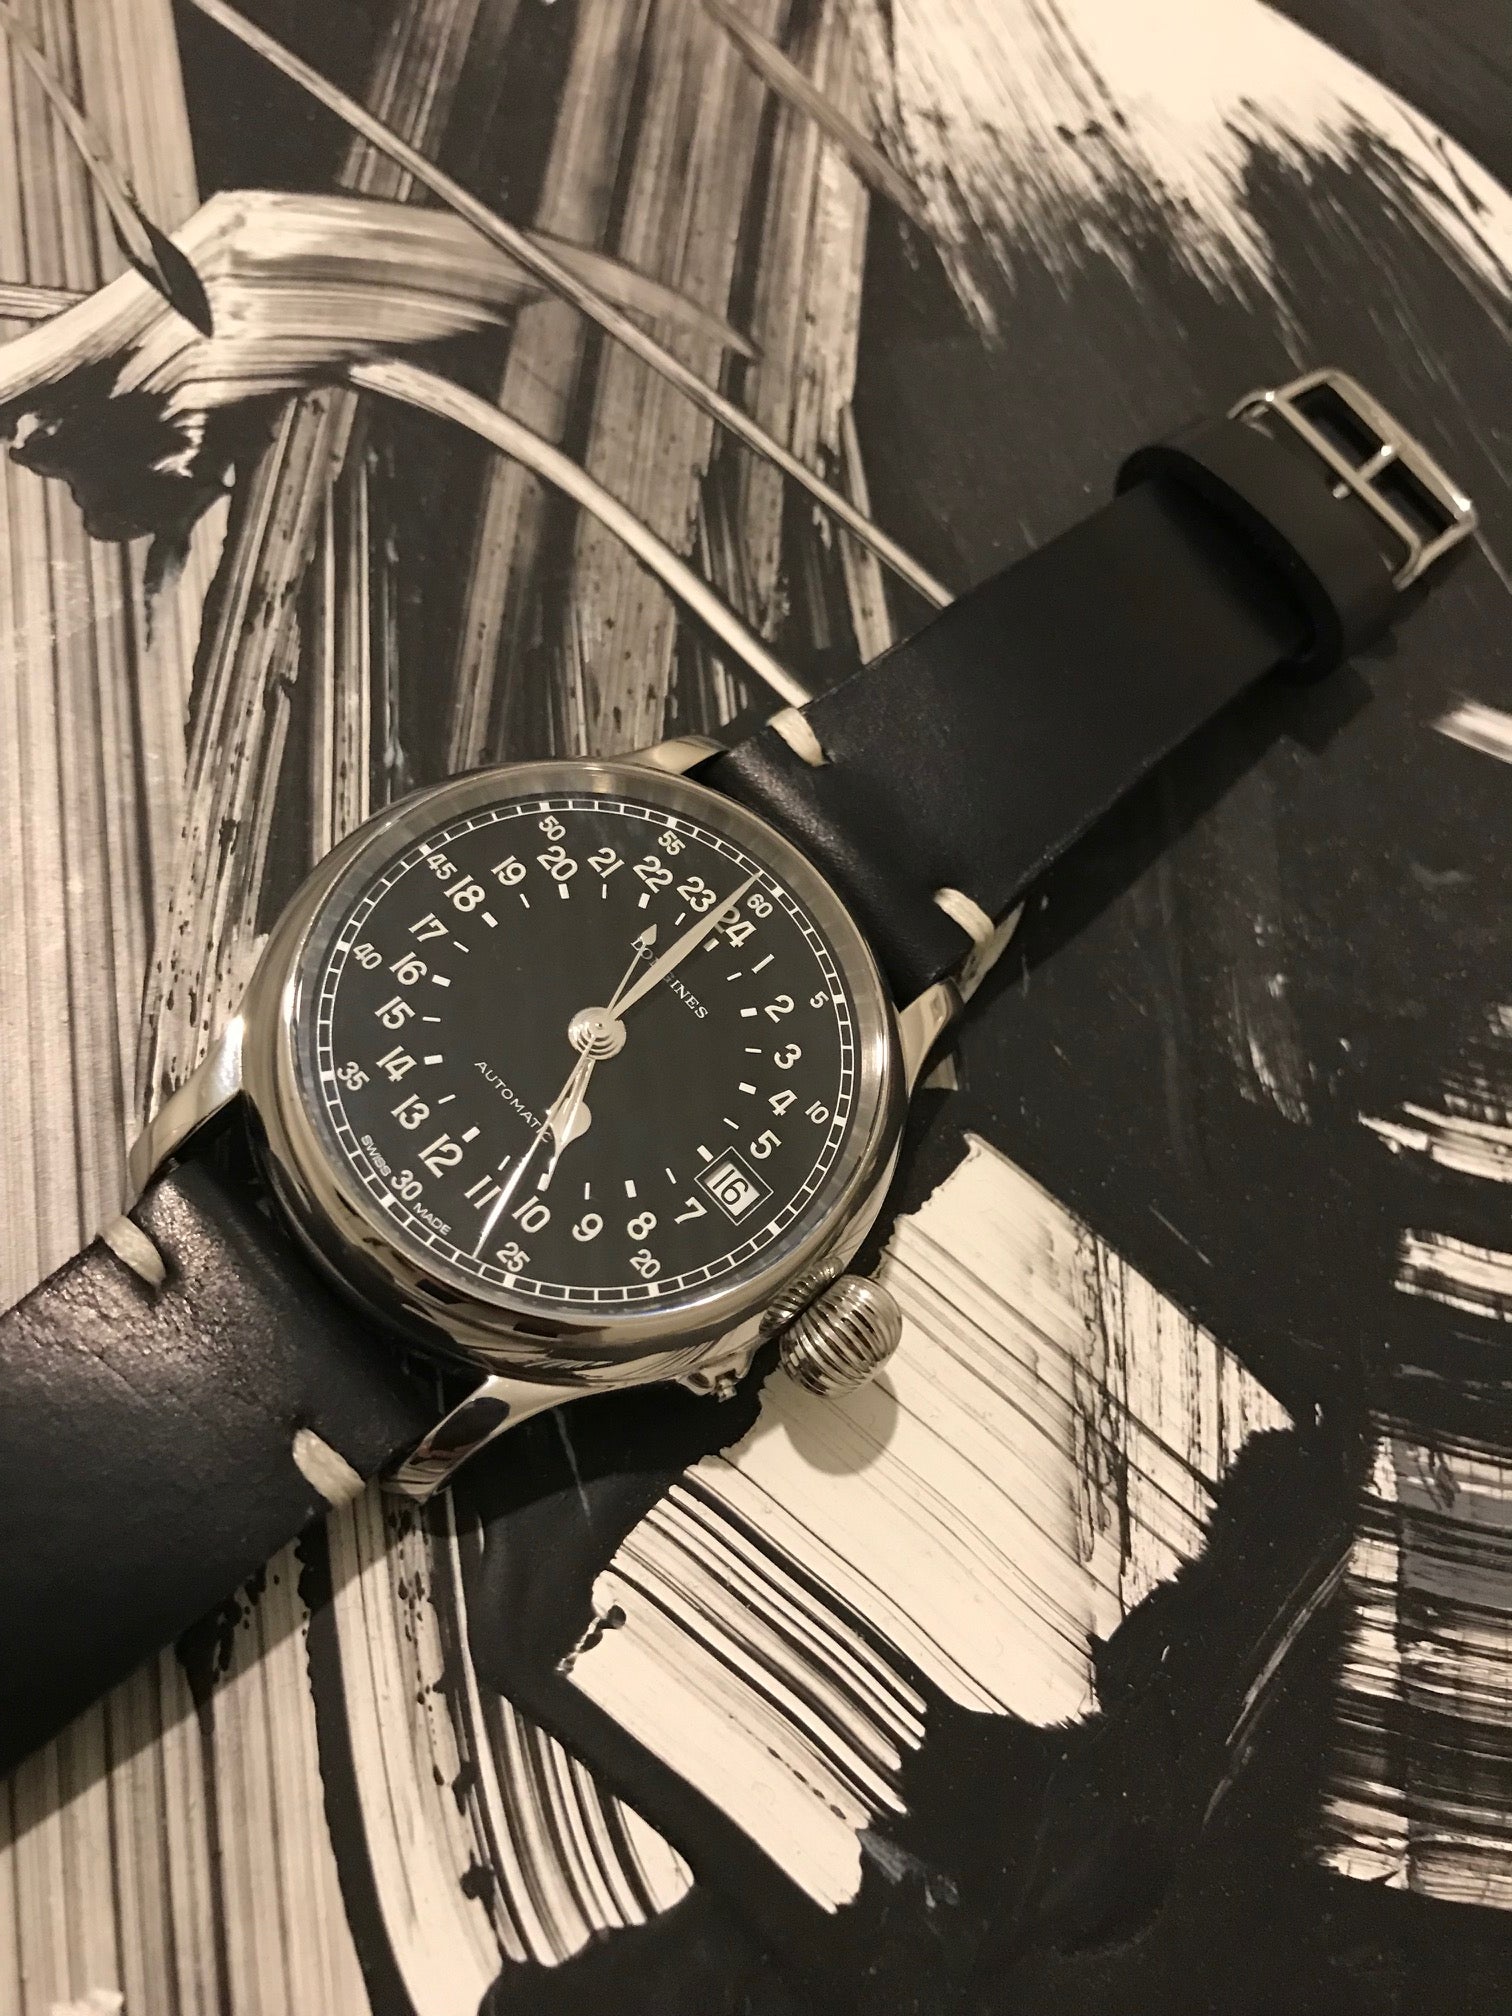 The Perfect Longines - finwatchstraps